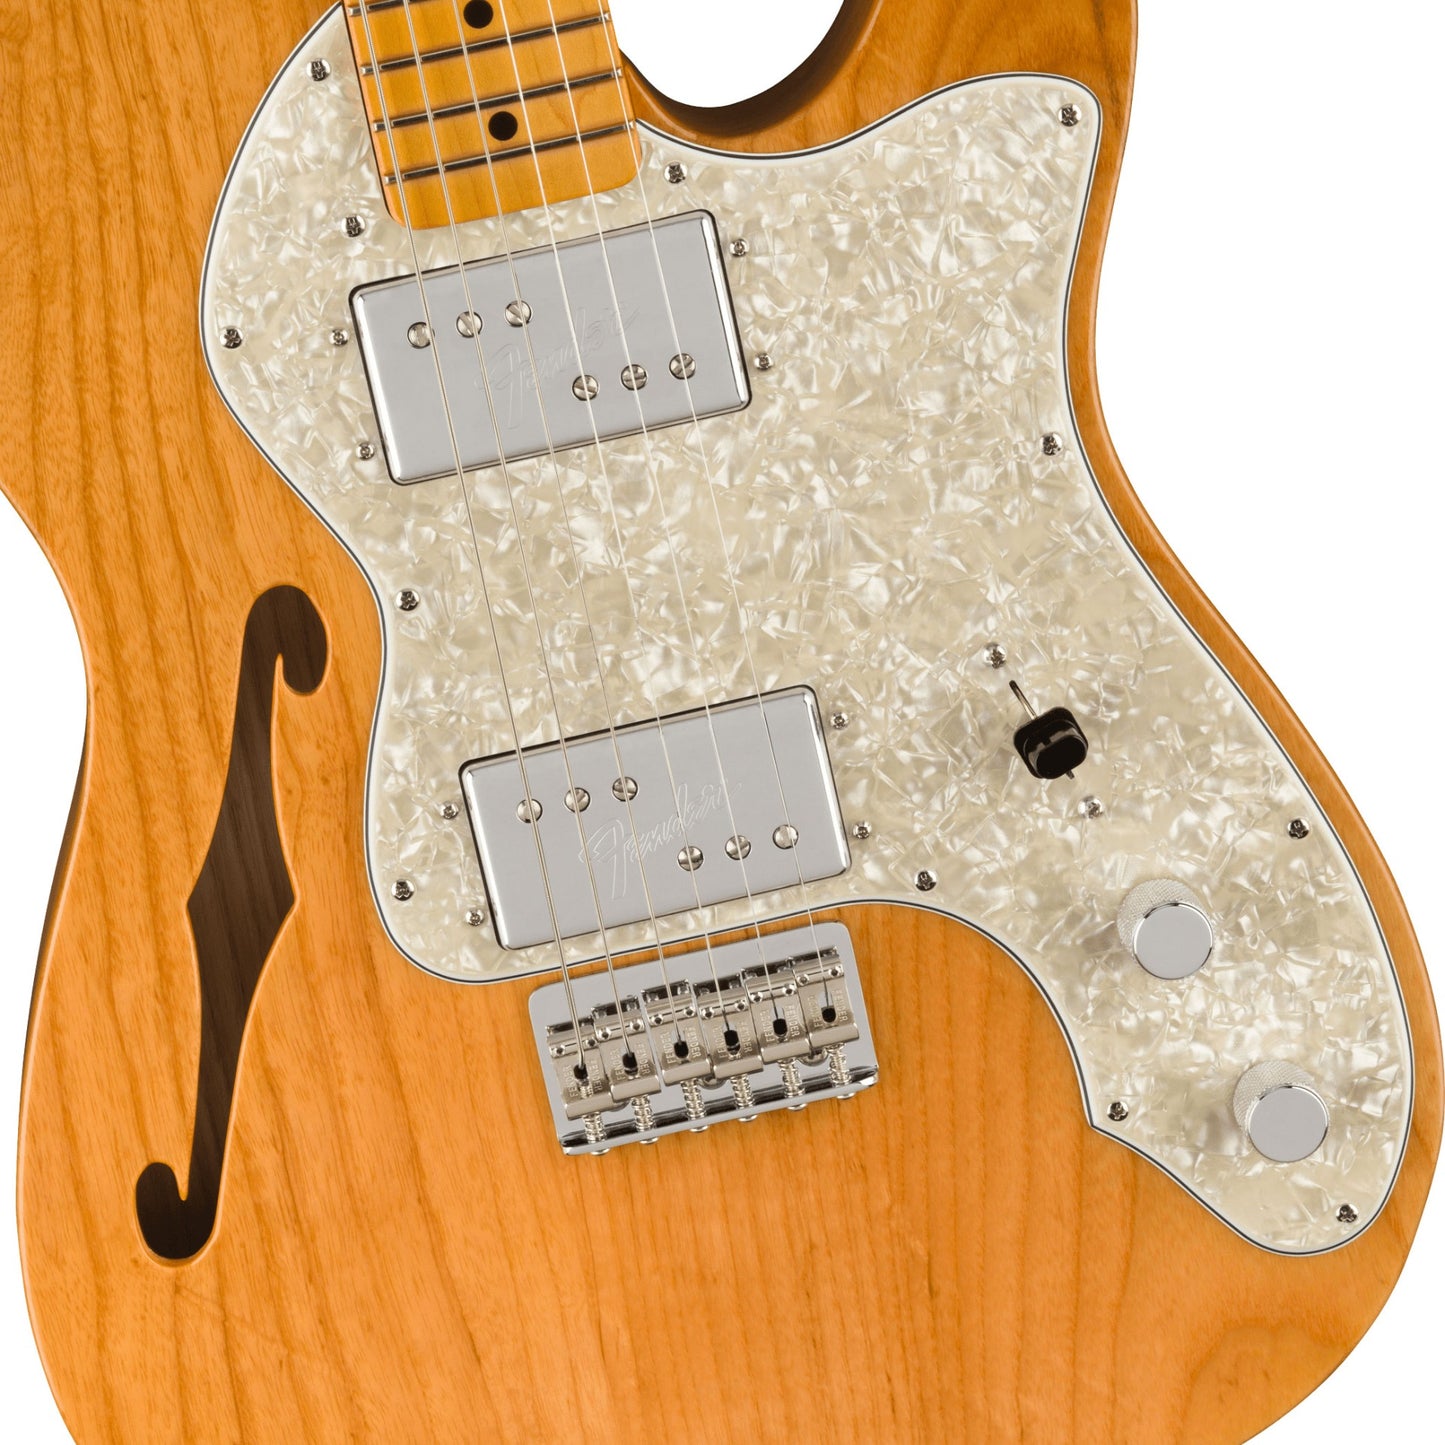 Fender American Vintage II 1972 Telecaster Thinline in Aged Natural